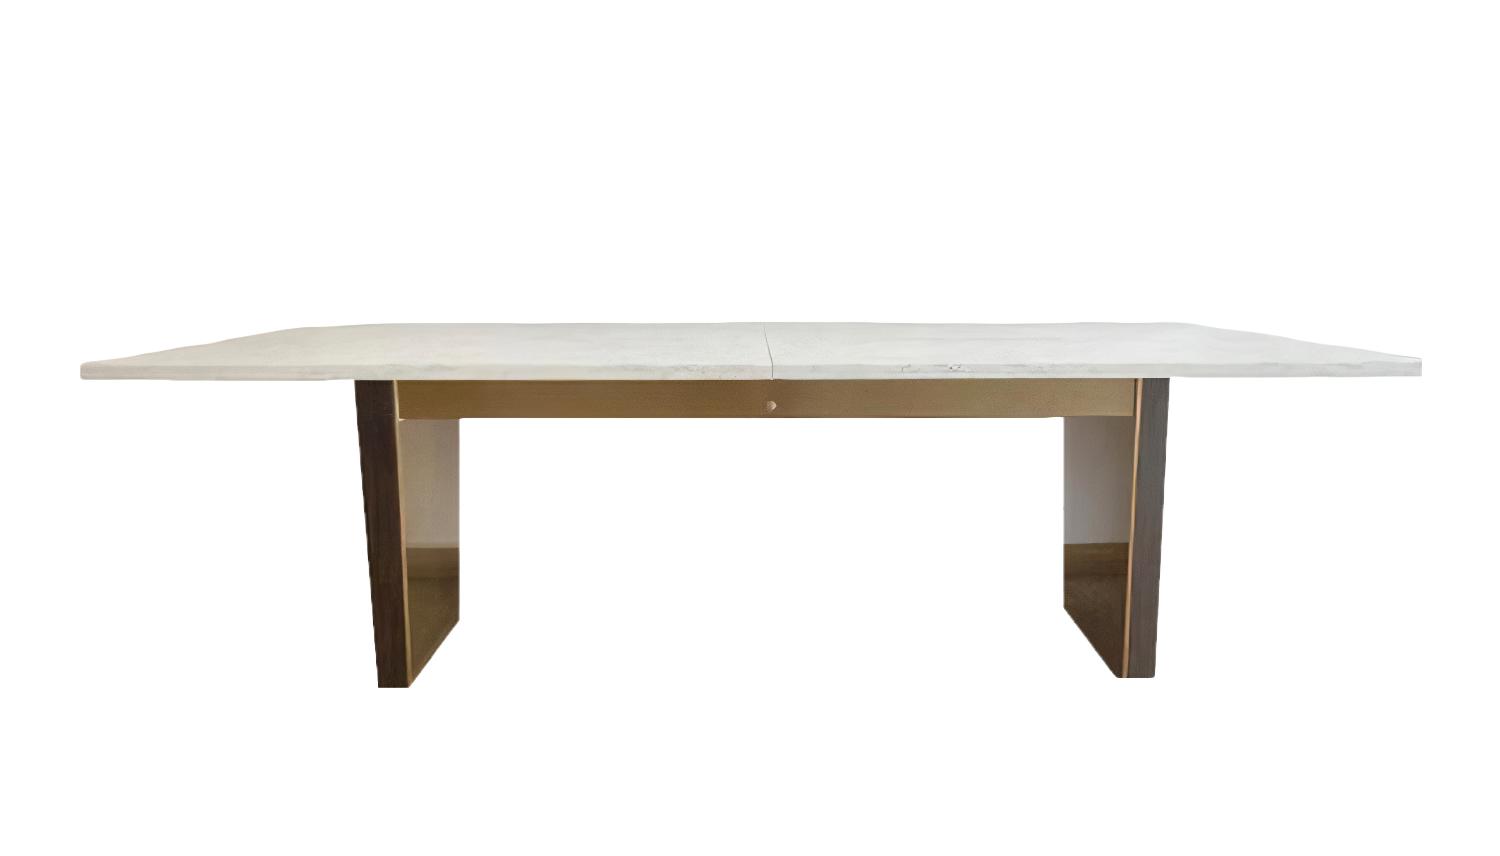 Contemporary, Modern Dining Table Auer VGGM-DT-VALDERA-DT in White, Gold 